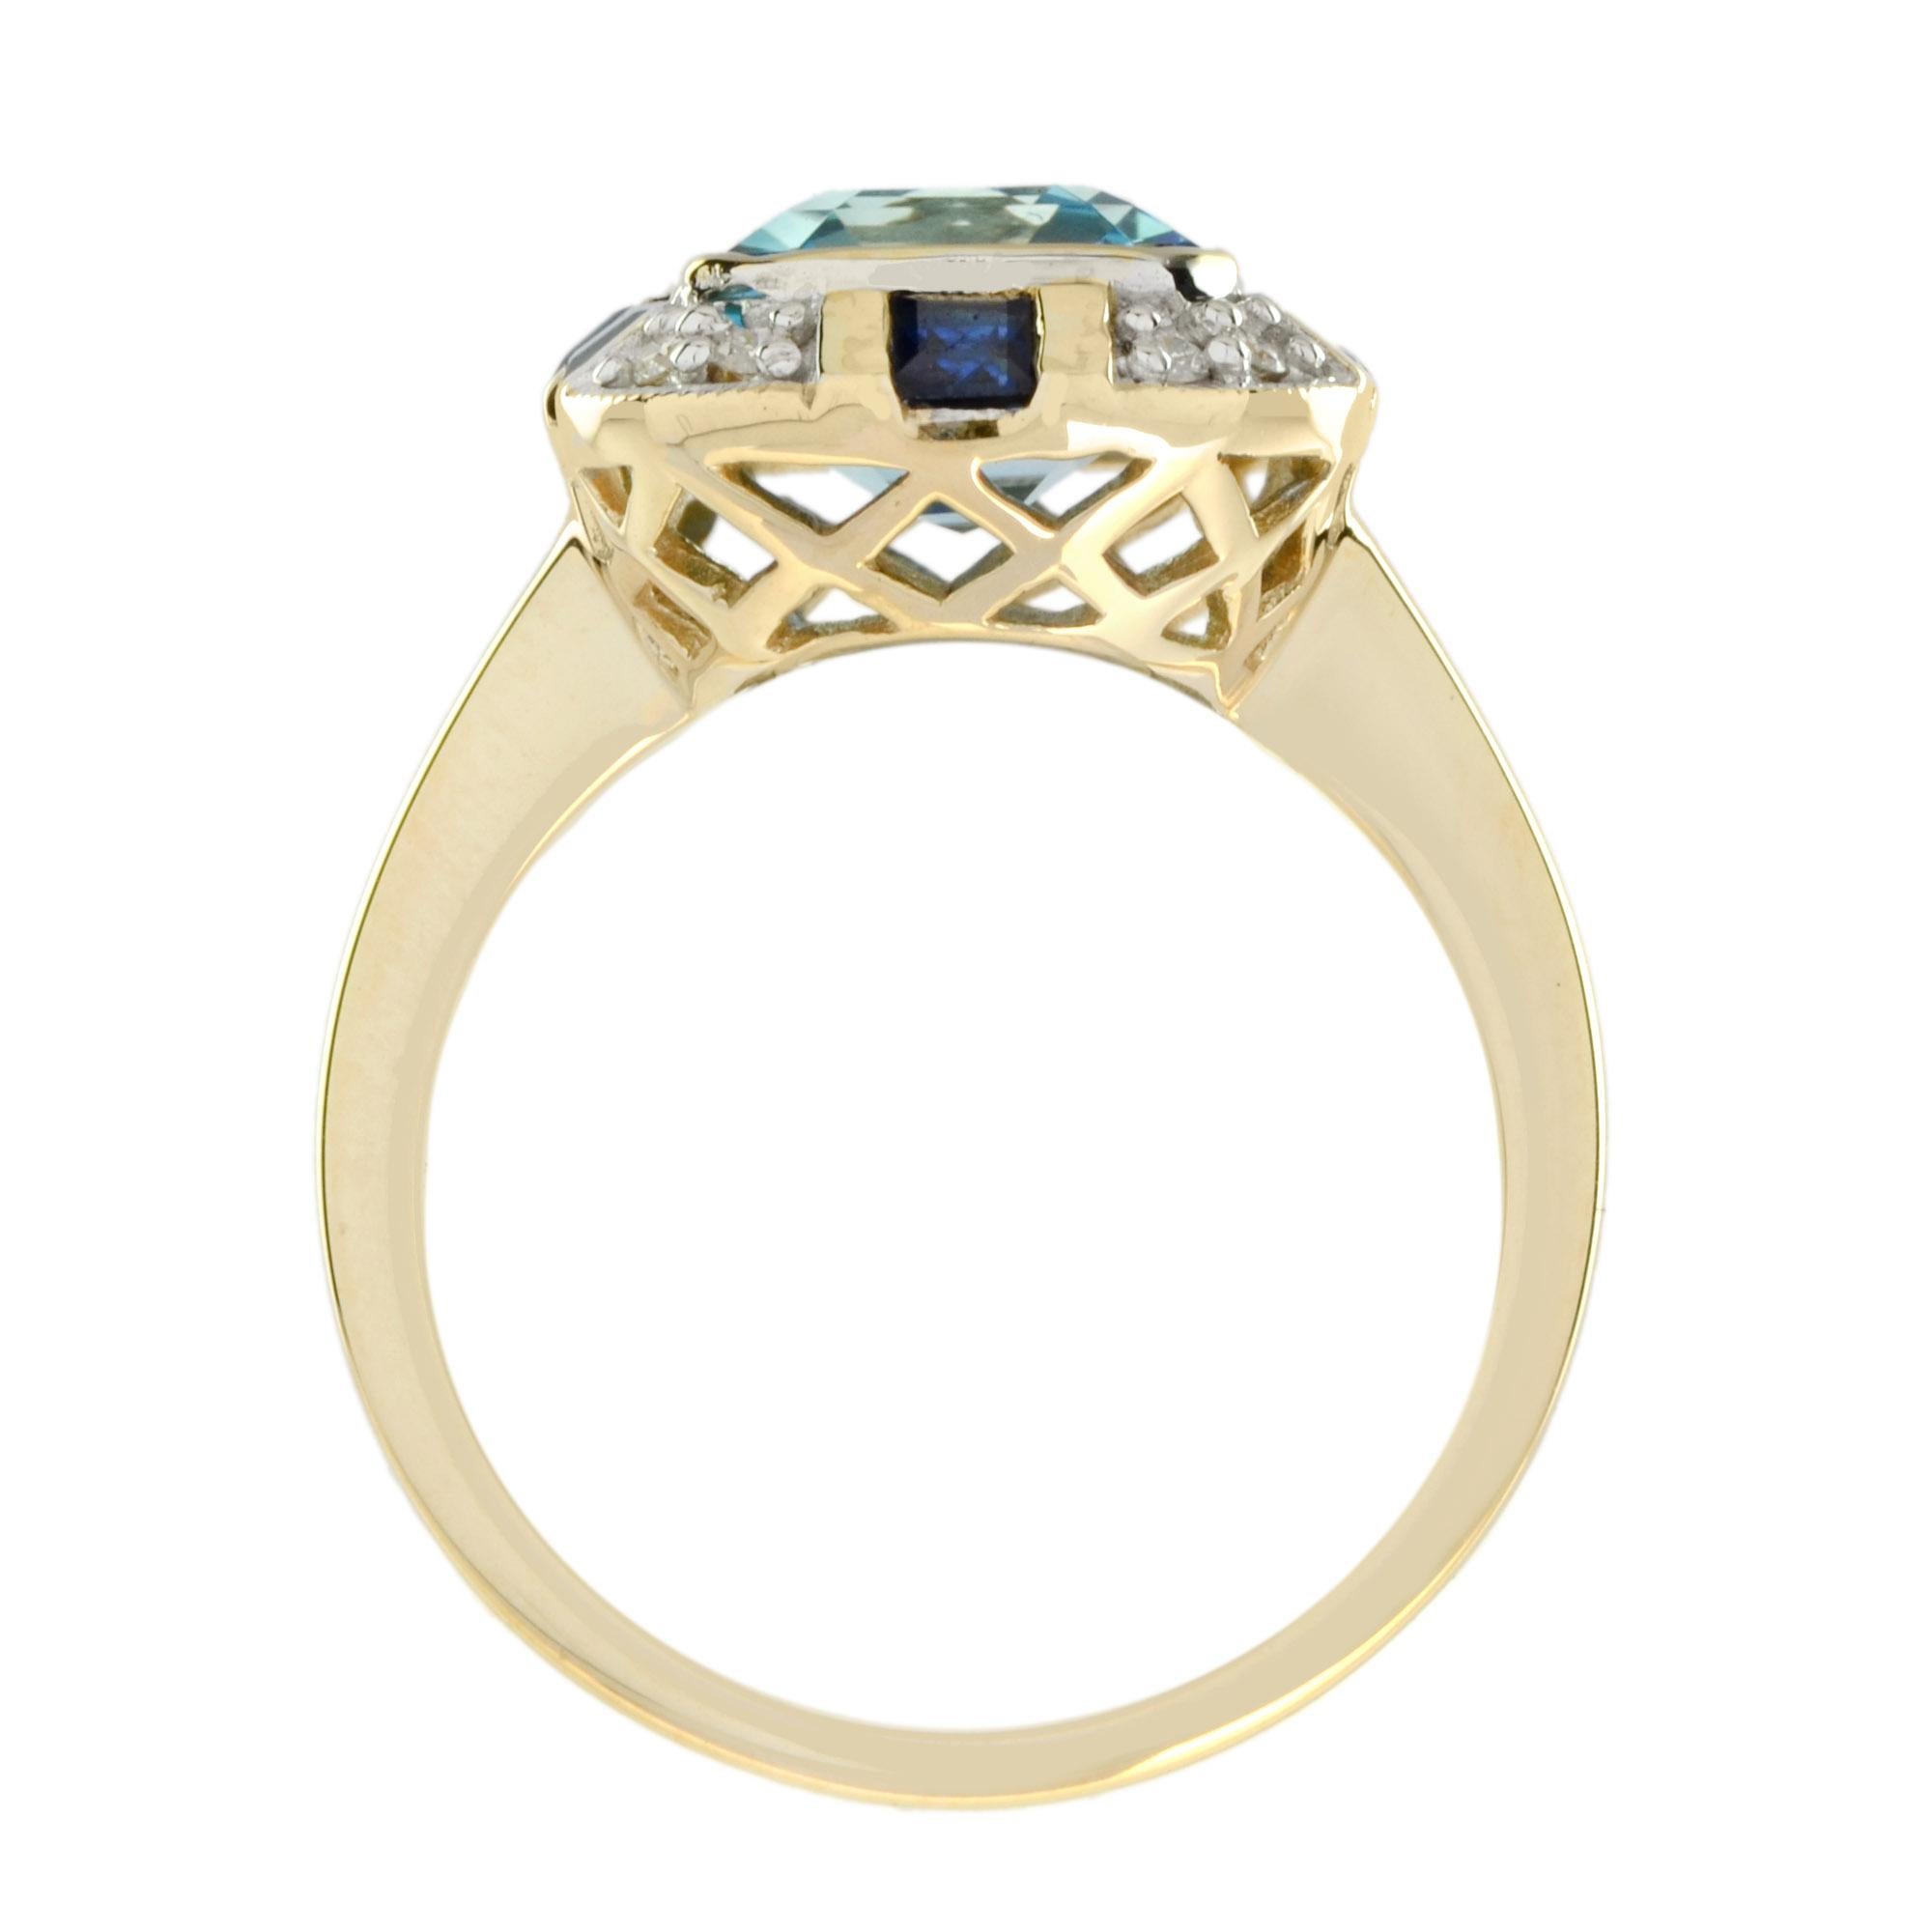 Women's Art Deco Style Blue Topaz Sapphire and Diamond Ring in White Top Yellow Gold For Sale